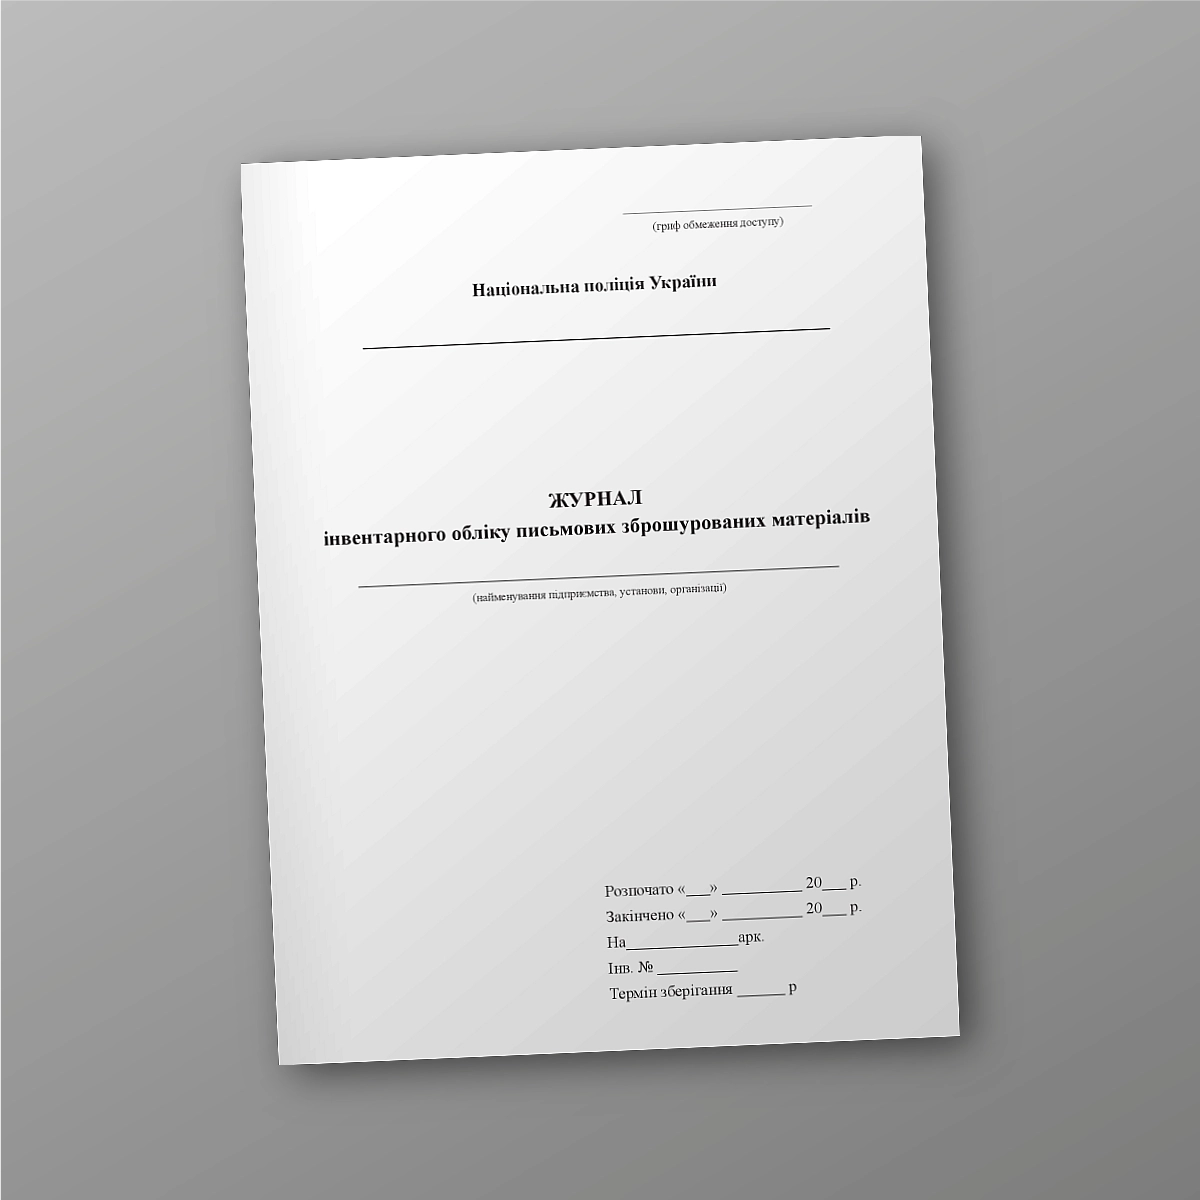 Journal of inventory accounting of written brochure materials | PrintTo: